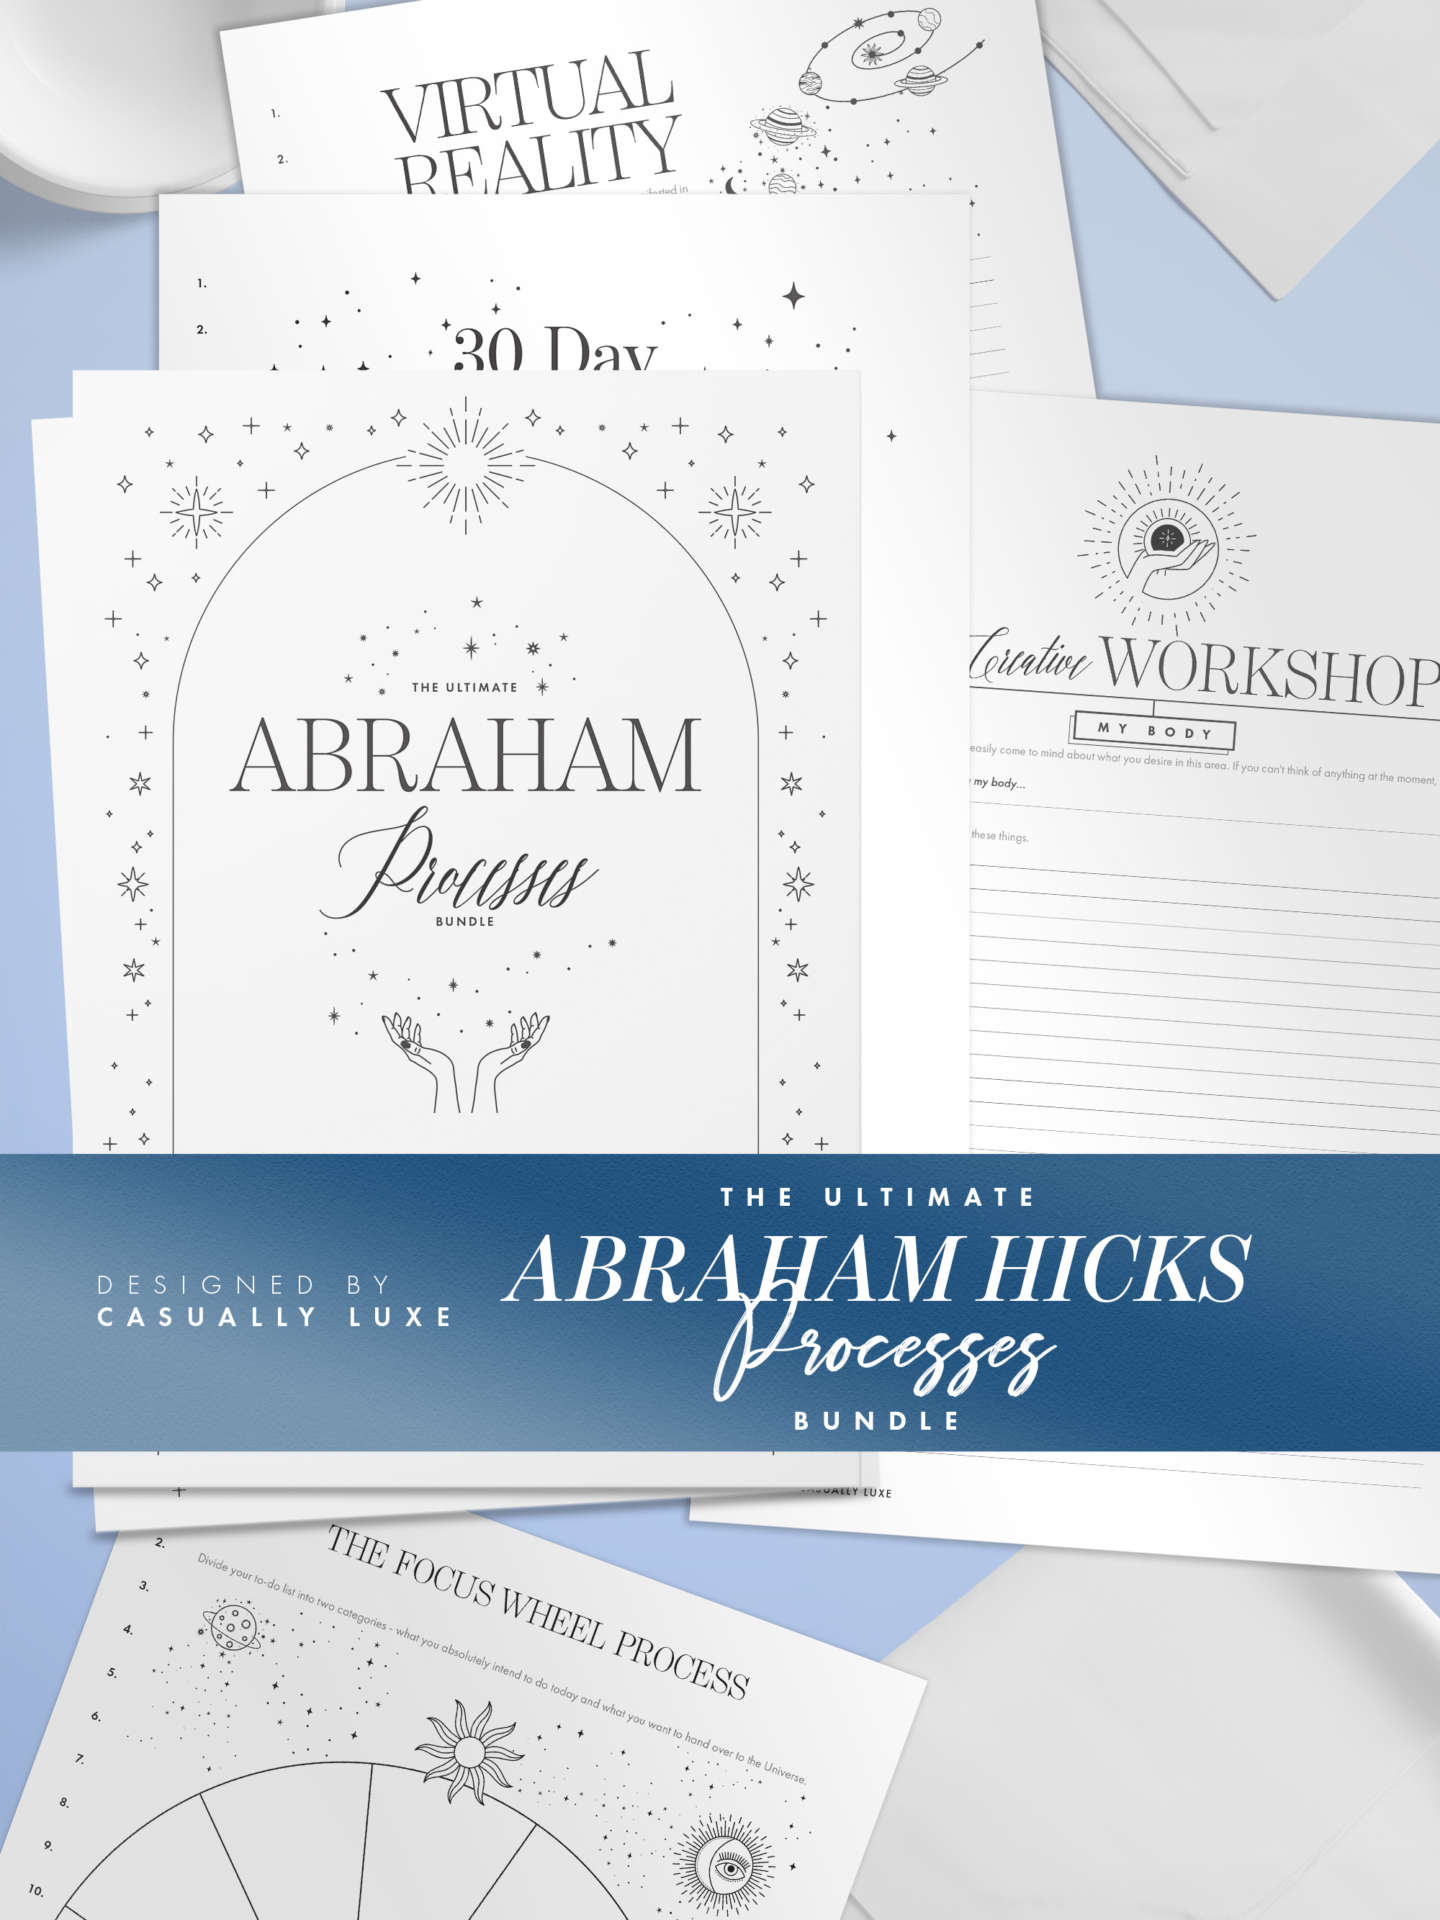 The Ultimate Abraham Hicks Processes Bundle - self help mental health worksheets PDF by Casually Luxe for Self Therapy and Self Development